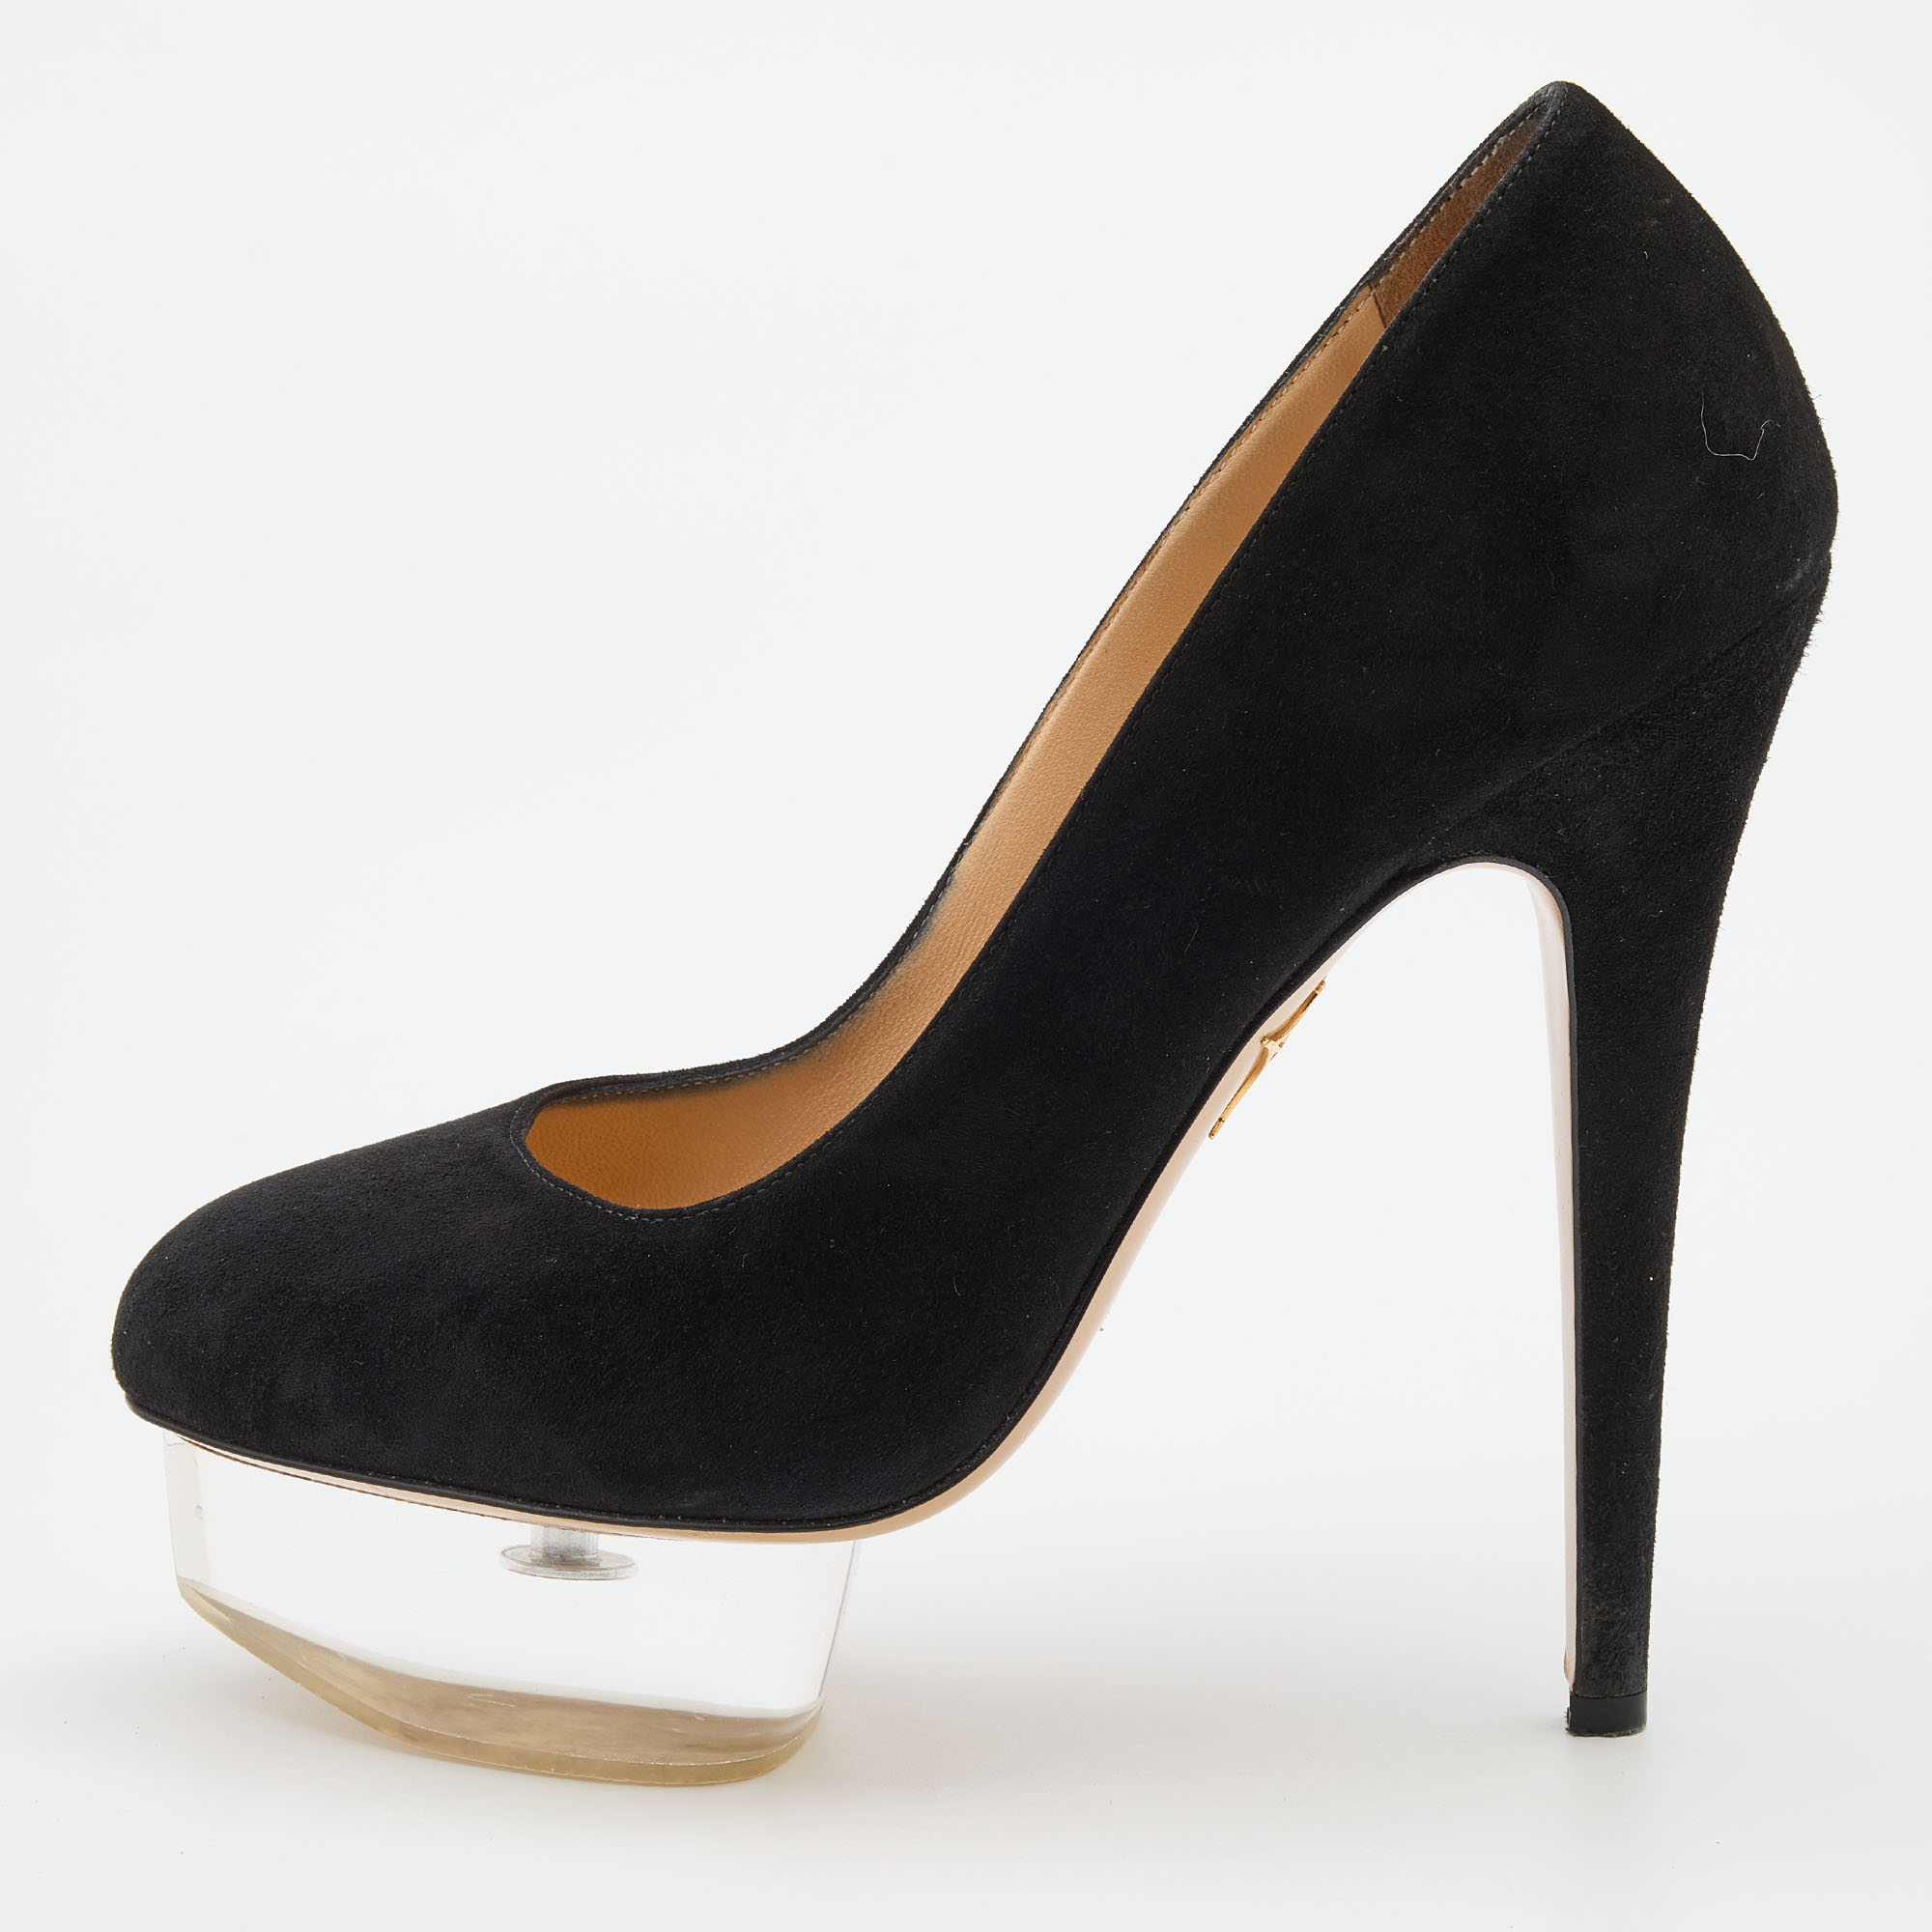 Charlotte olympia black suede dolly platform pumps size 38